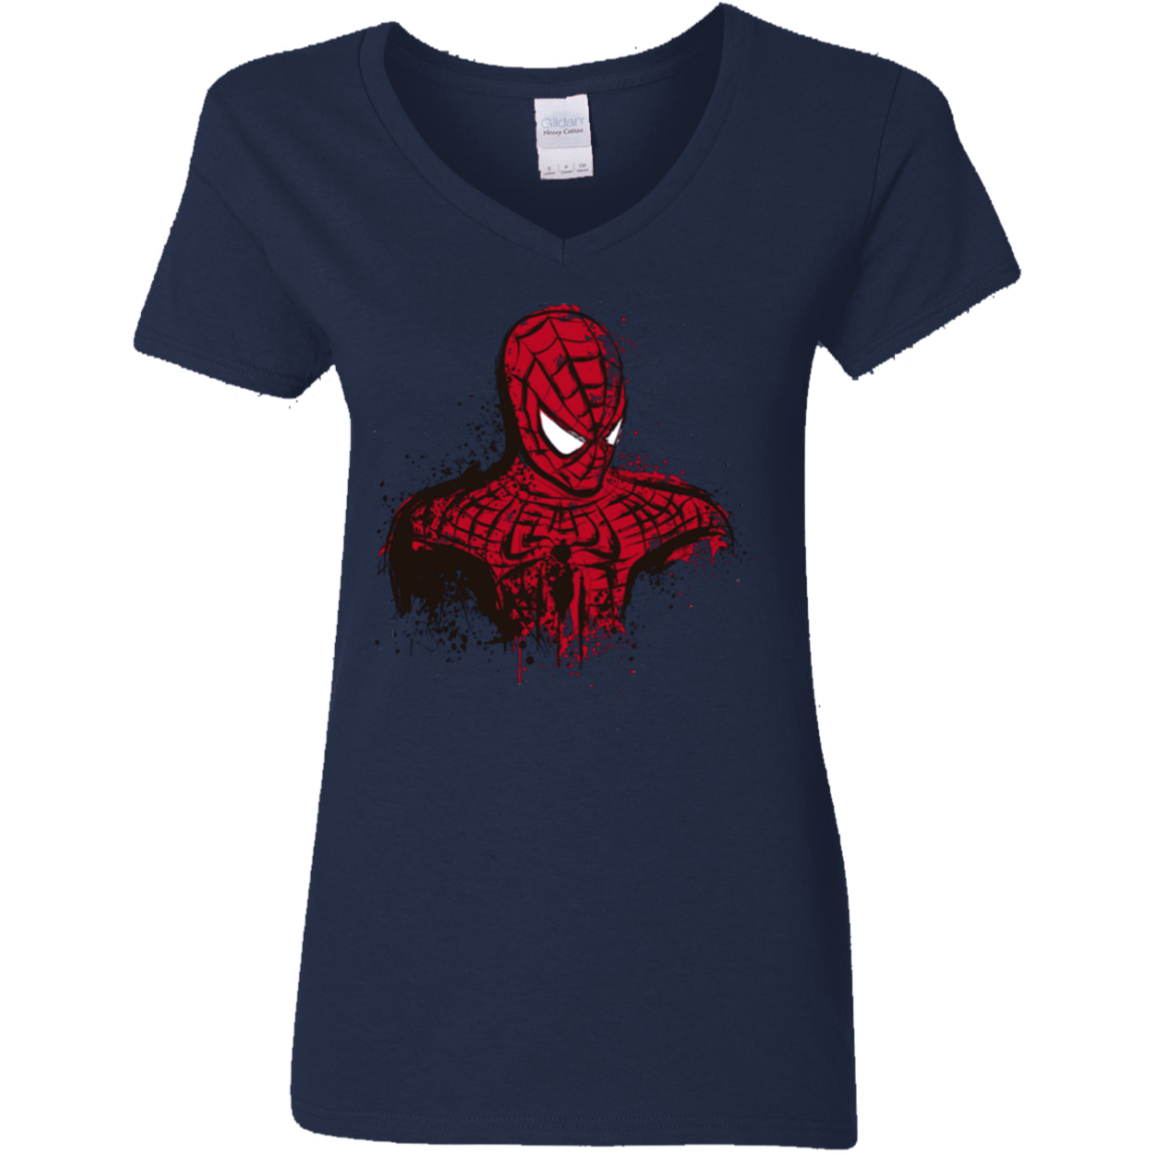 T-Shirts Navy / S Behind the Mask Women's V-Neck T-Shirt